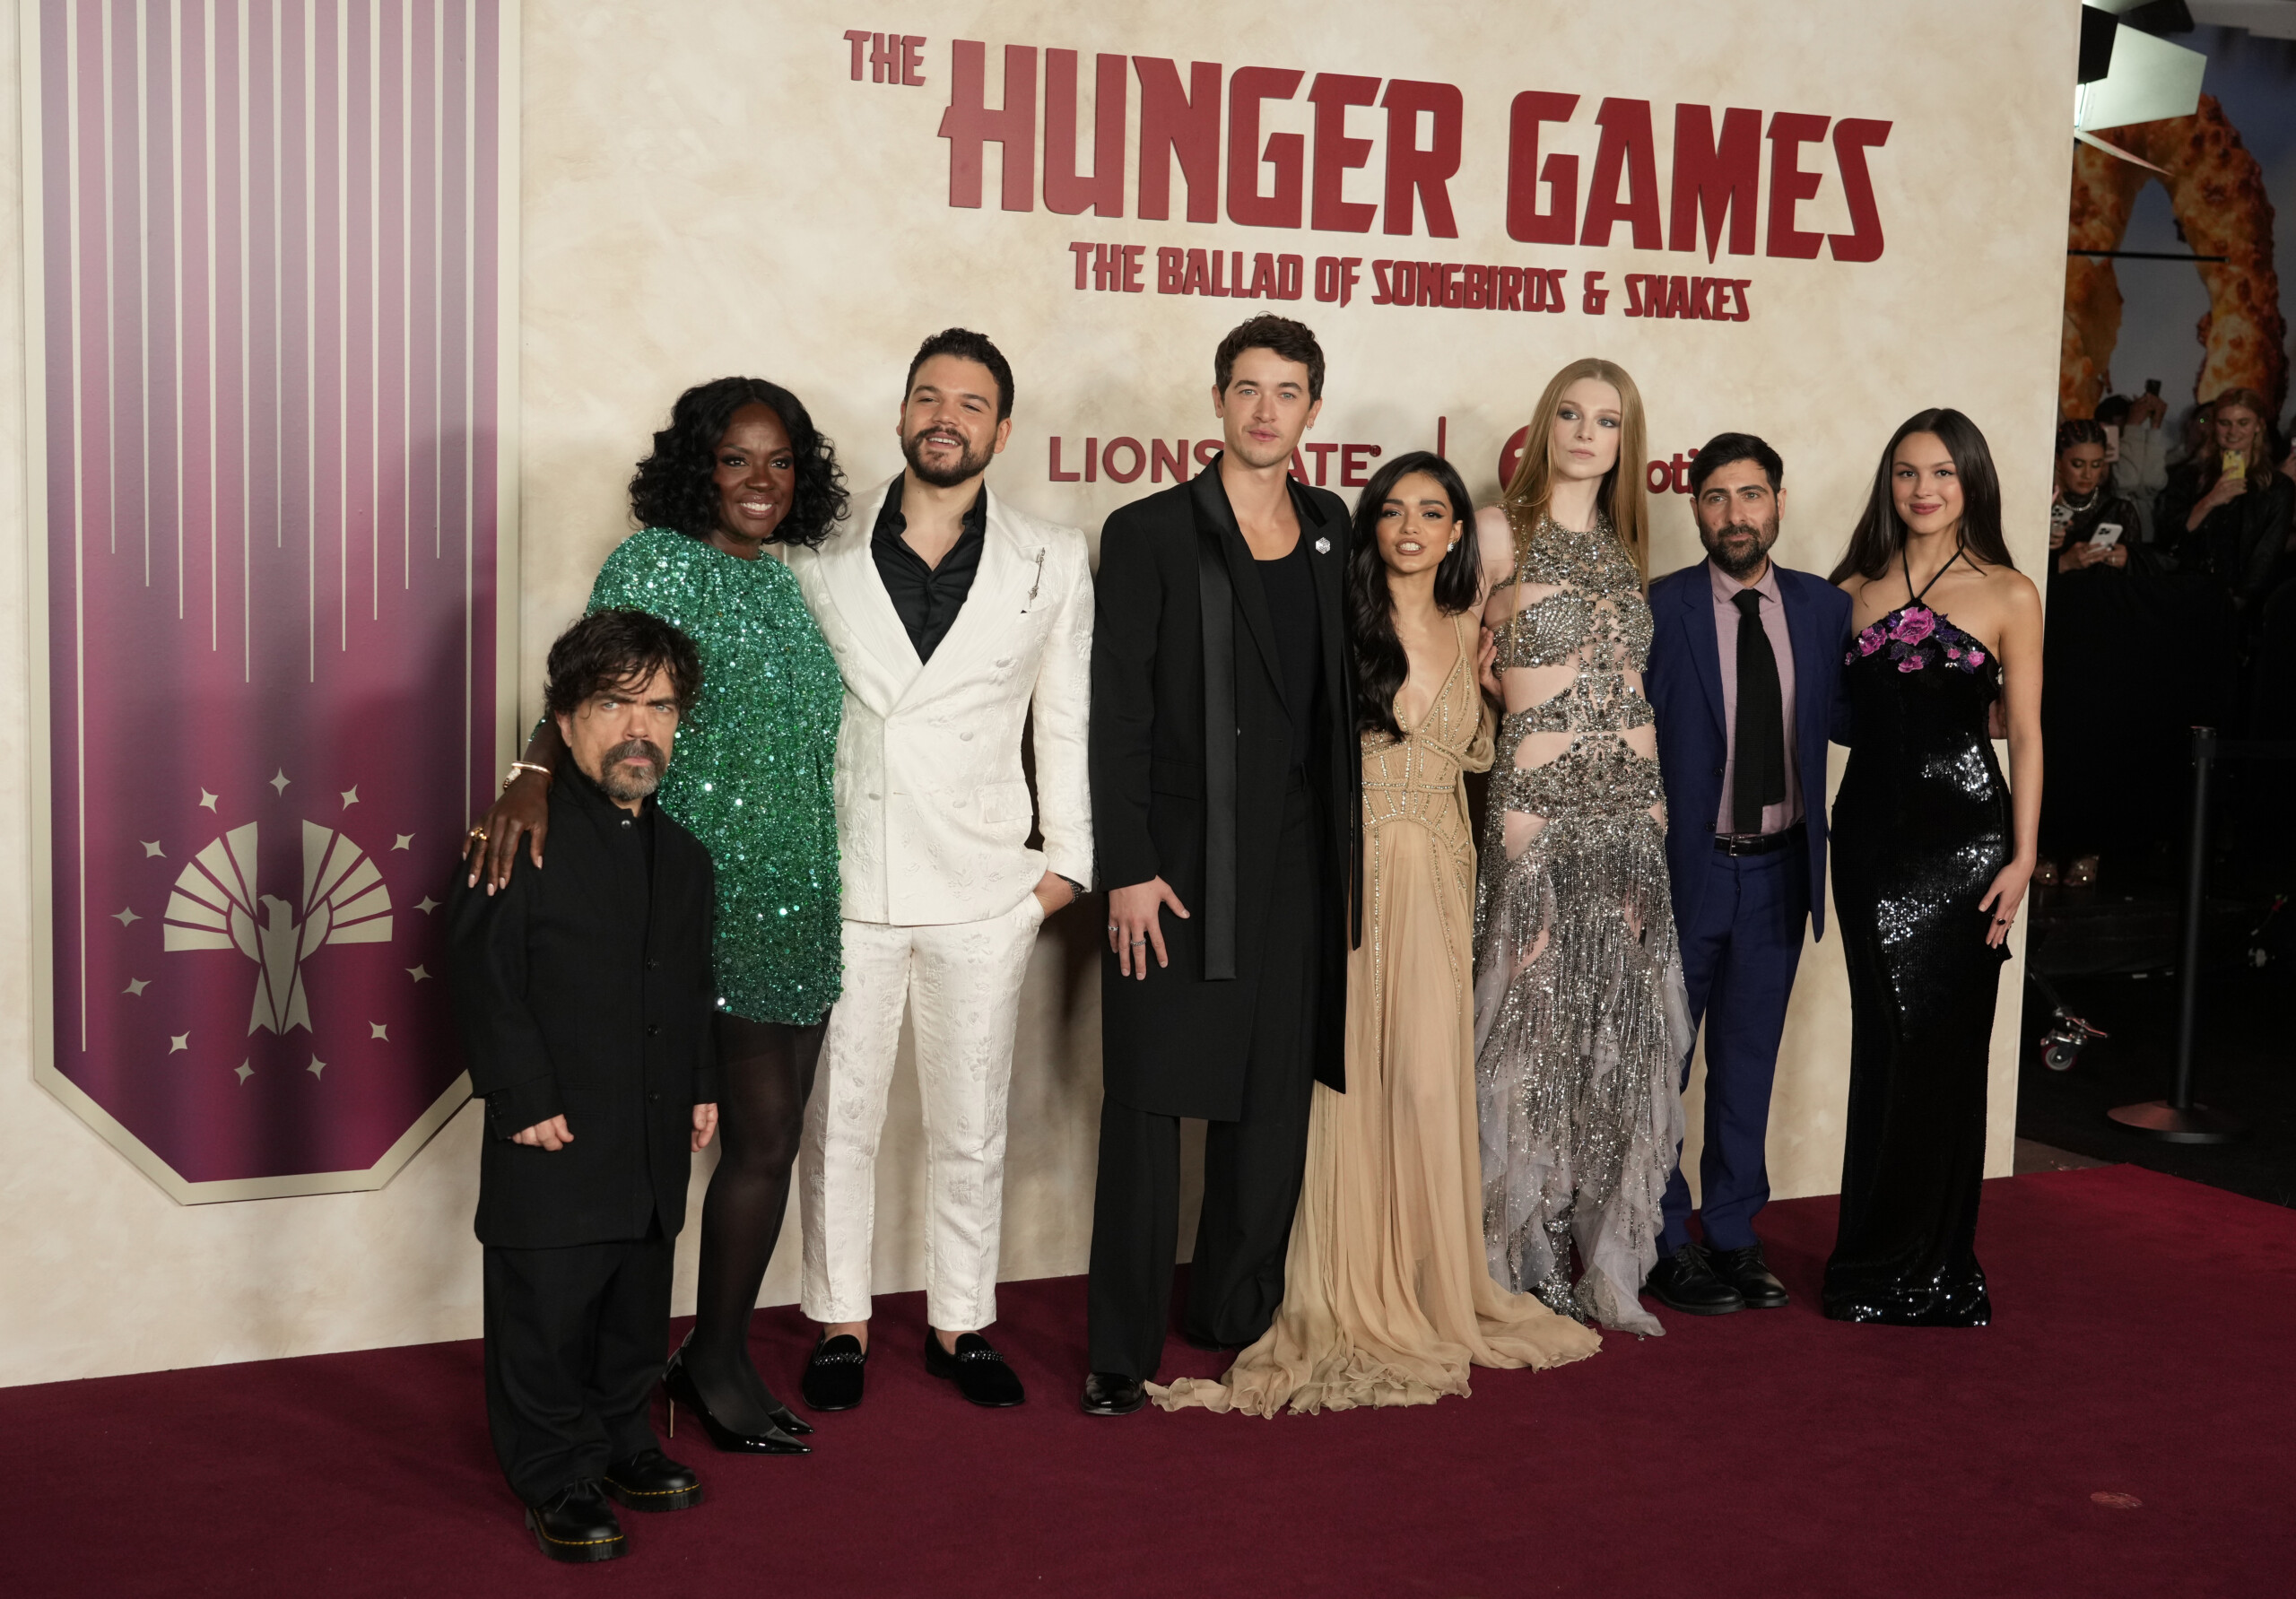 Will Liongate's New 'Hunger Games' Prequel Struggle Without